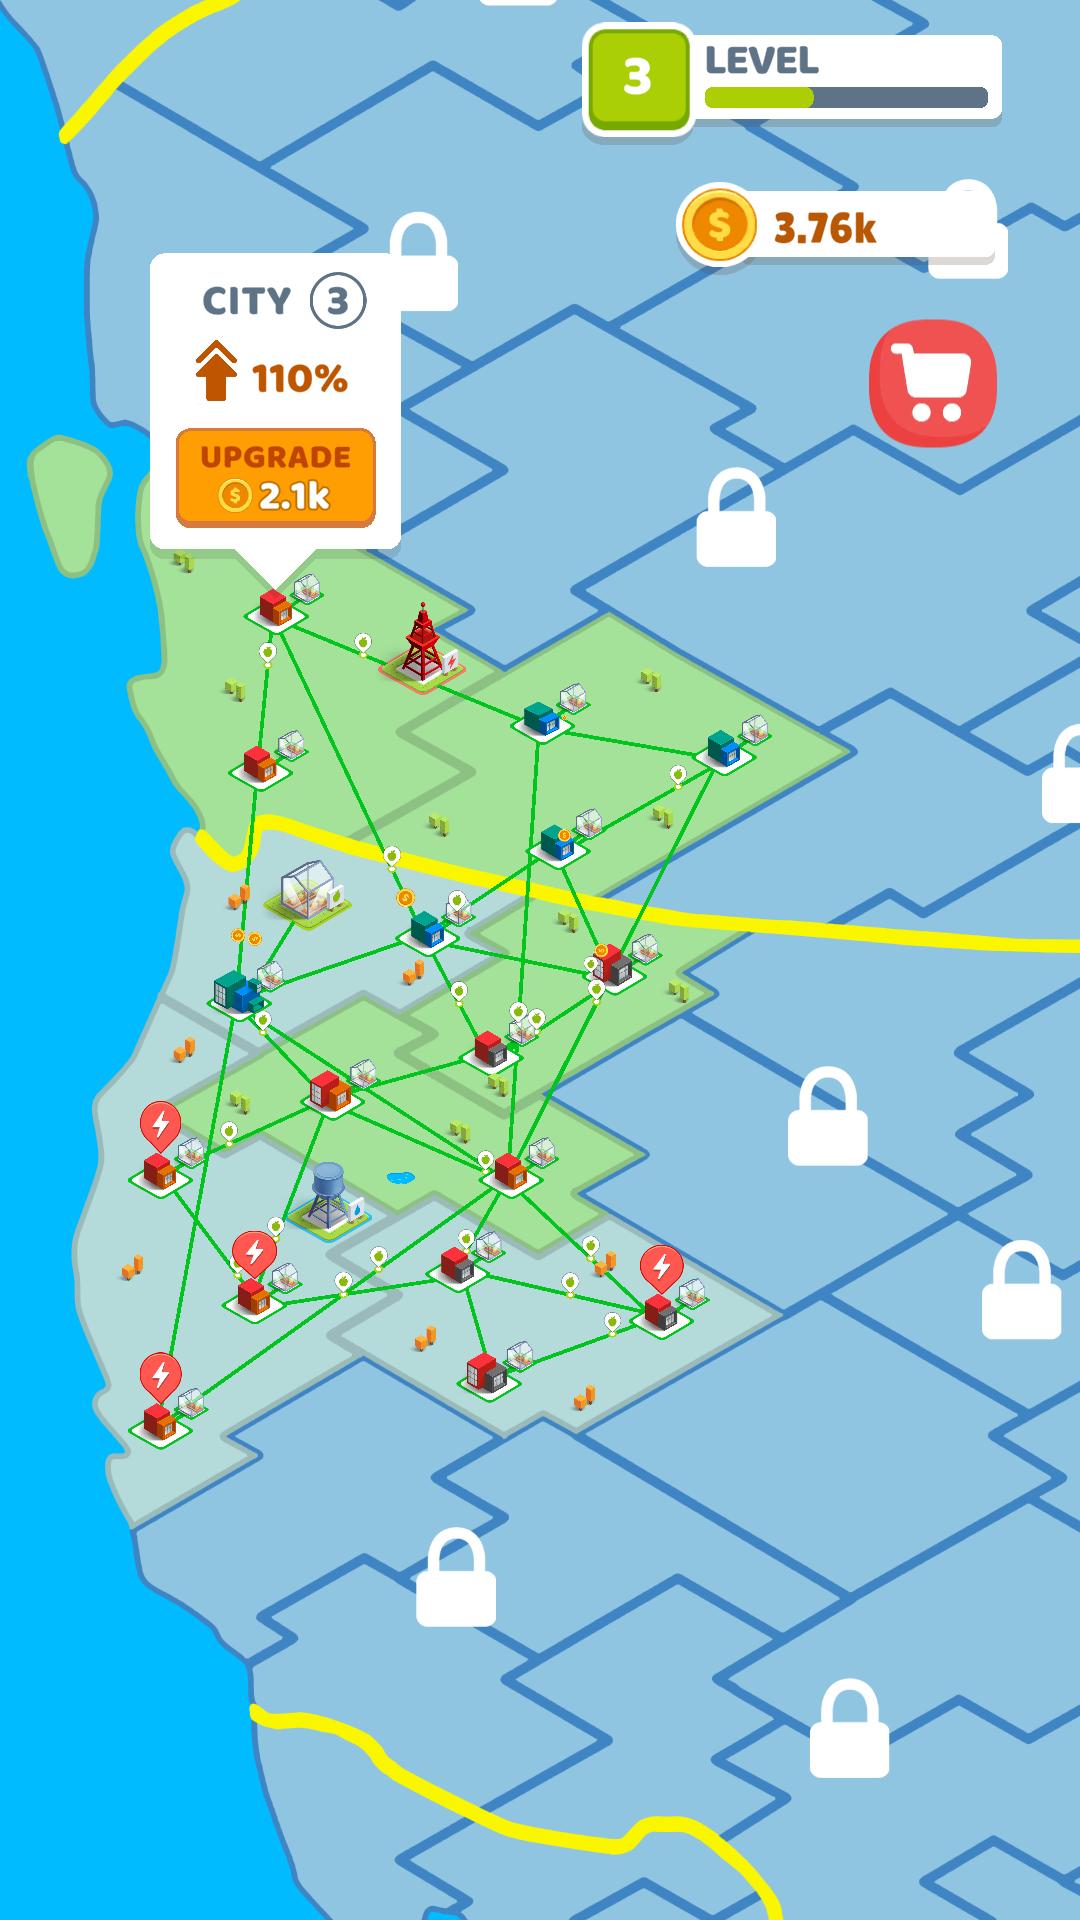 Connect Map - Android game screenshots.